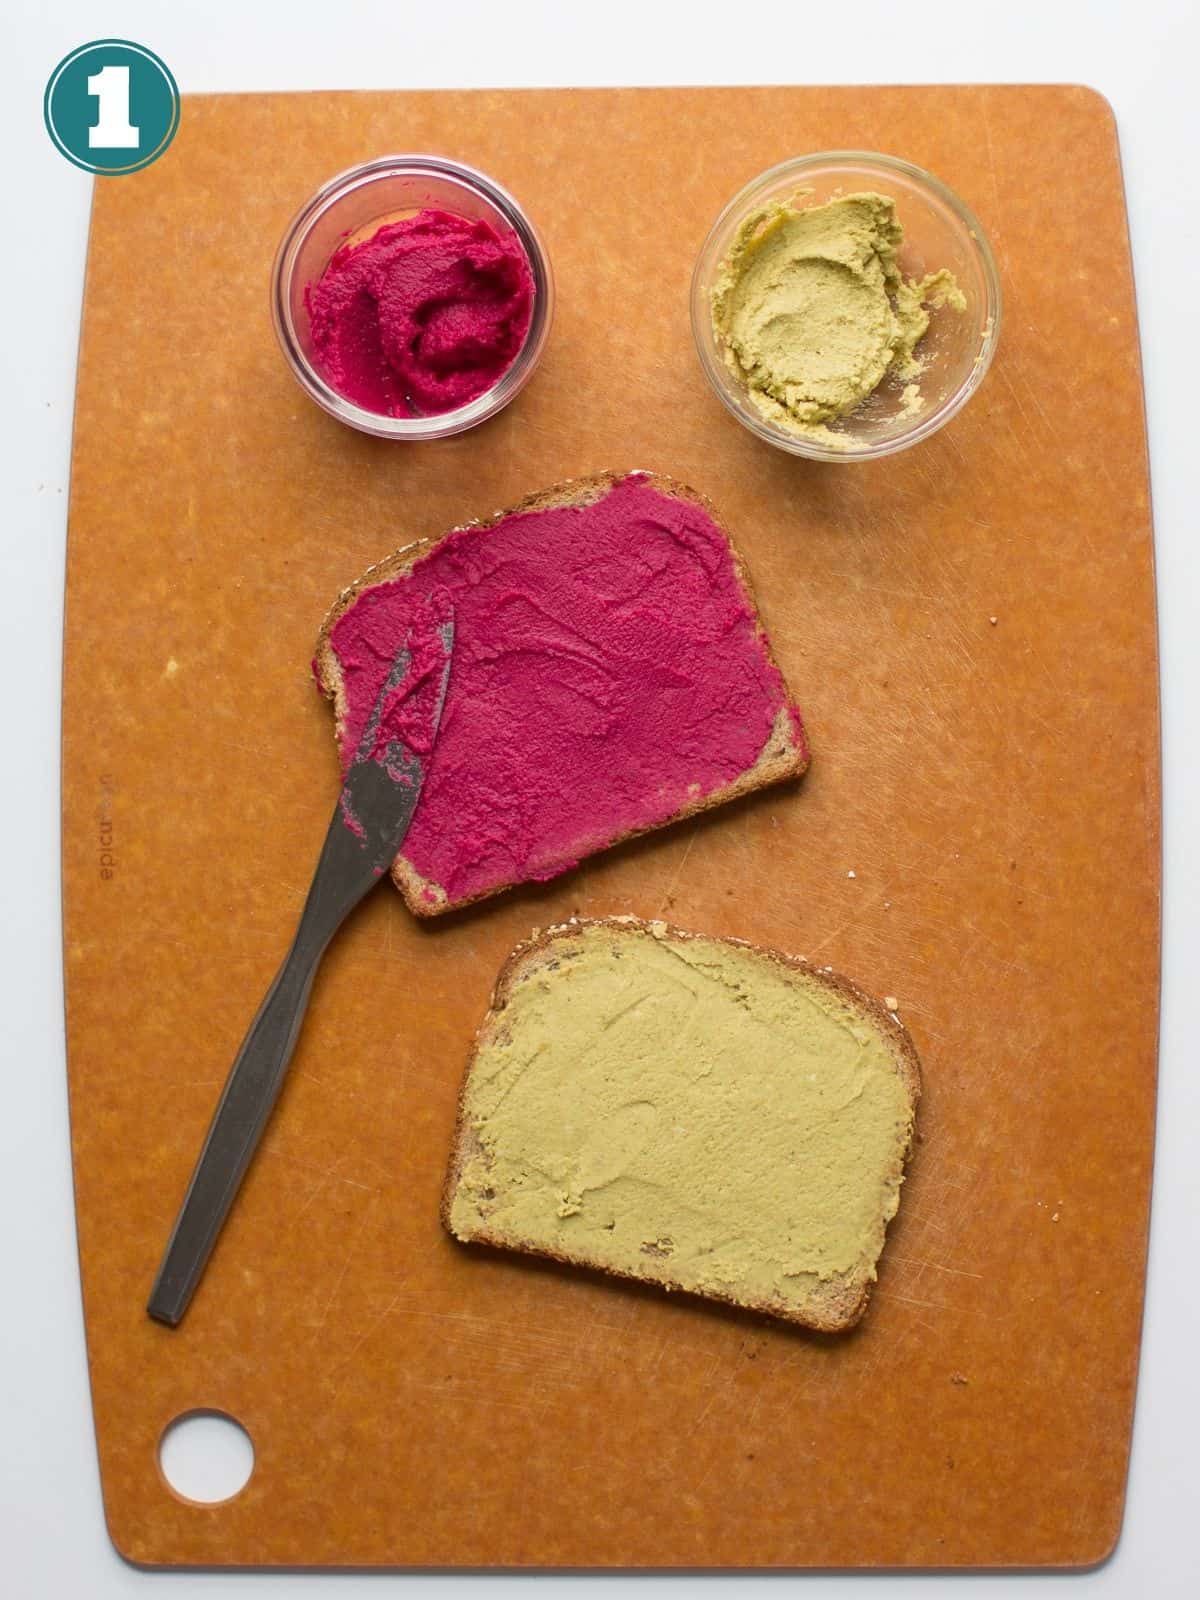 two pieces of bread, one with broccoli hummus and the other one with beet hummus.